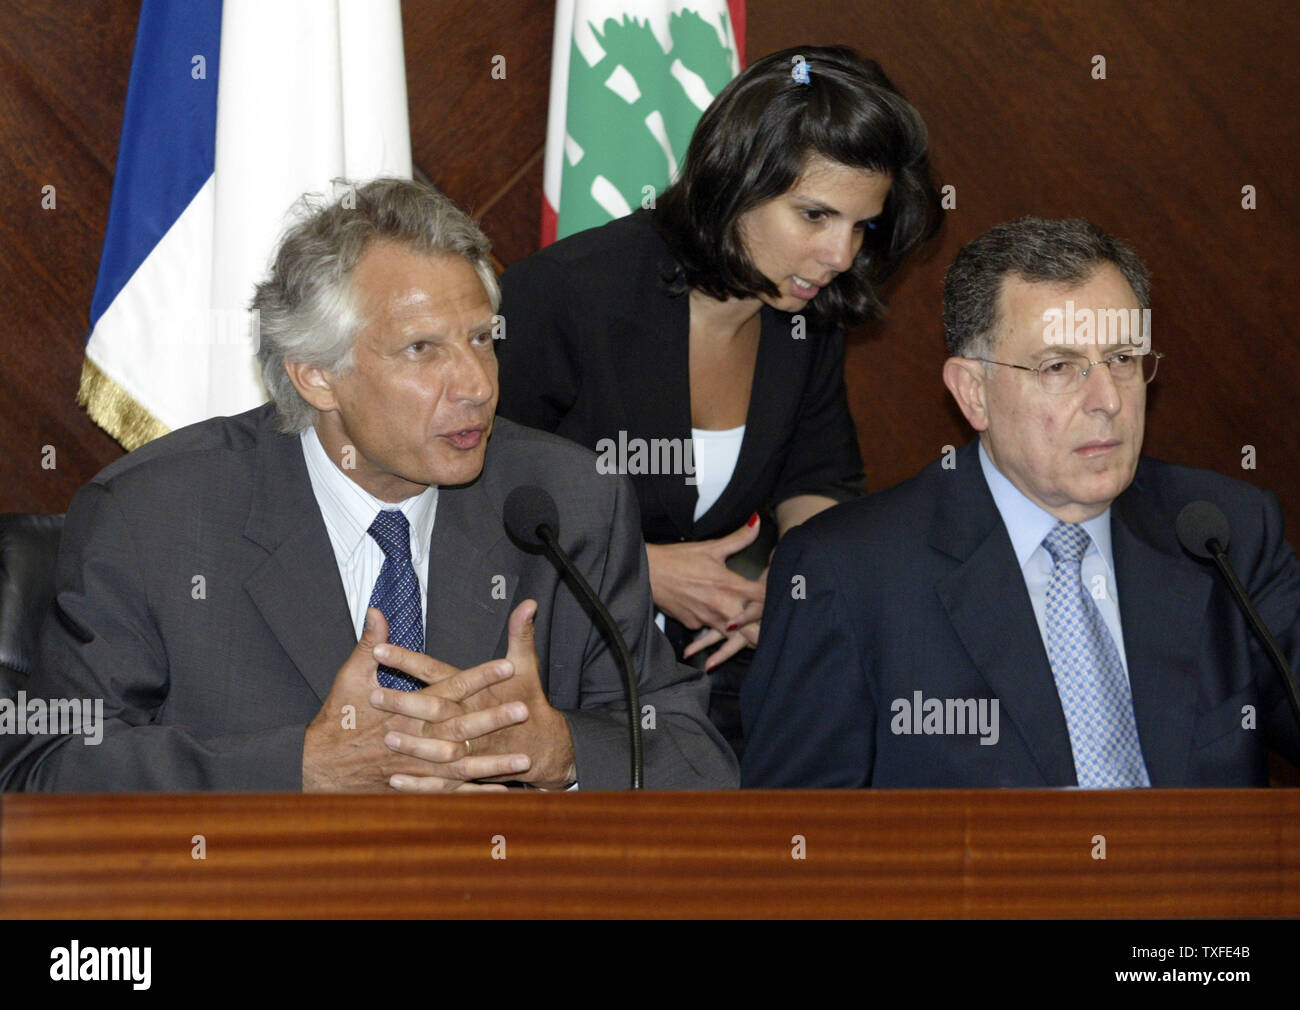 Visiting French Prime Minister Dominique De Villepin (L) and Lebanese Prime Minister Fouad Siniora appear at a press conference in Beirut on July 17, 2006. De Villepin is in Lebanon to help stop the conflict from escalating. Embassies are beginning to evacuate their nationals from Lebanon. Close to two-hundred Lebanese, mostly civilians, have died since the conflict began on July 12, after Hezbollah guerrilla's kidnapped two Israeli soldiers and killed 7 others.  (UPI Photo/Stringer) Stock Photo